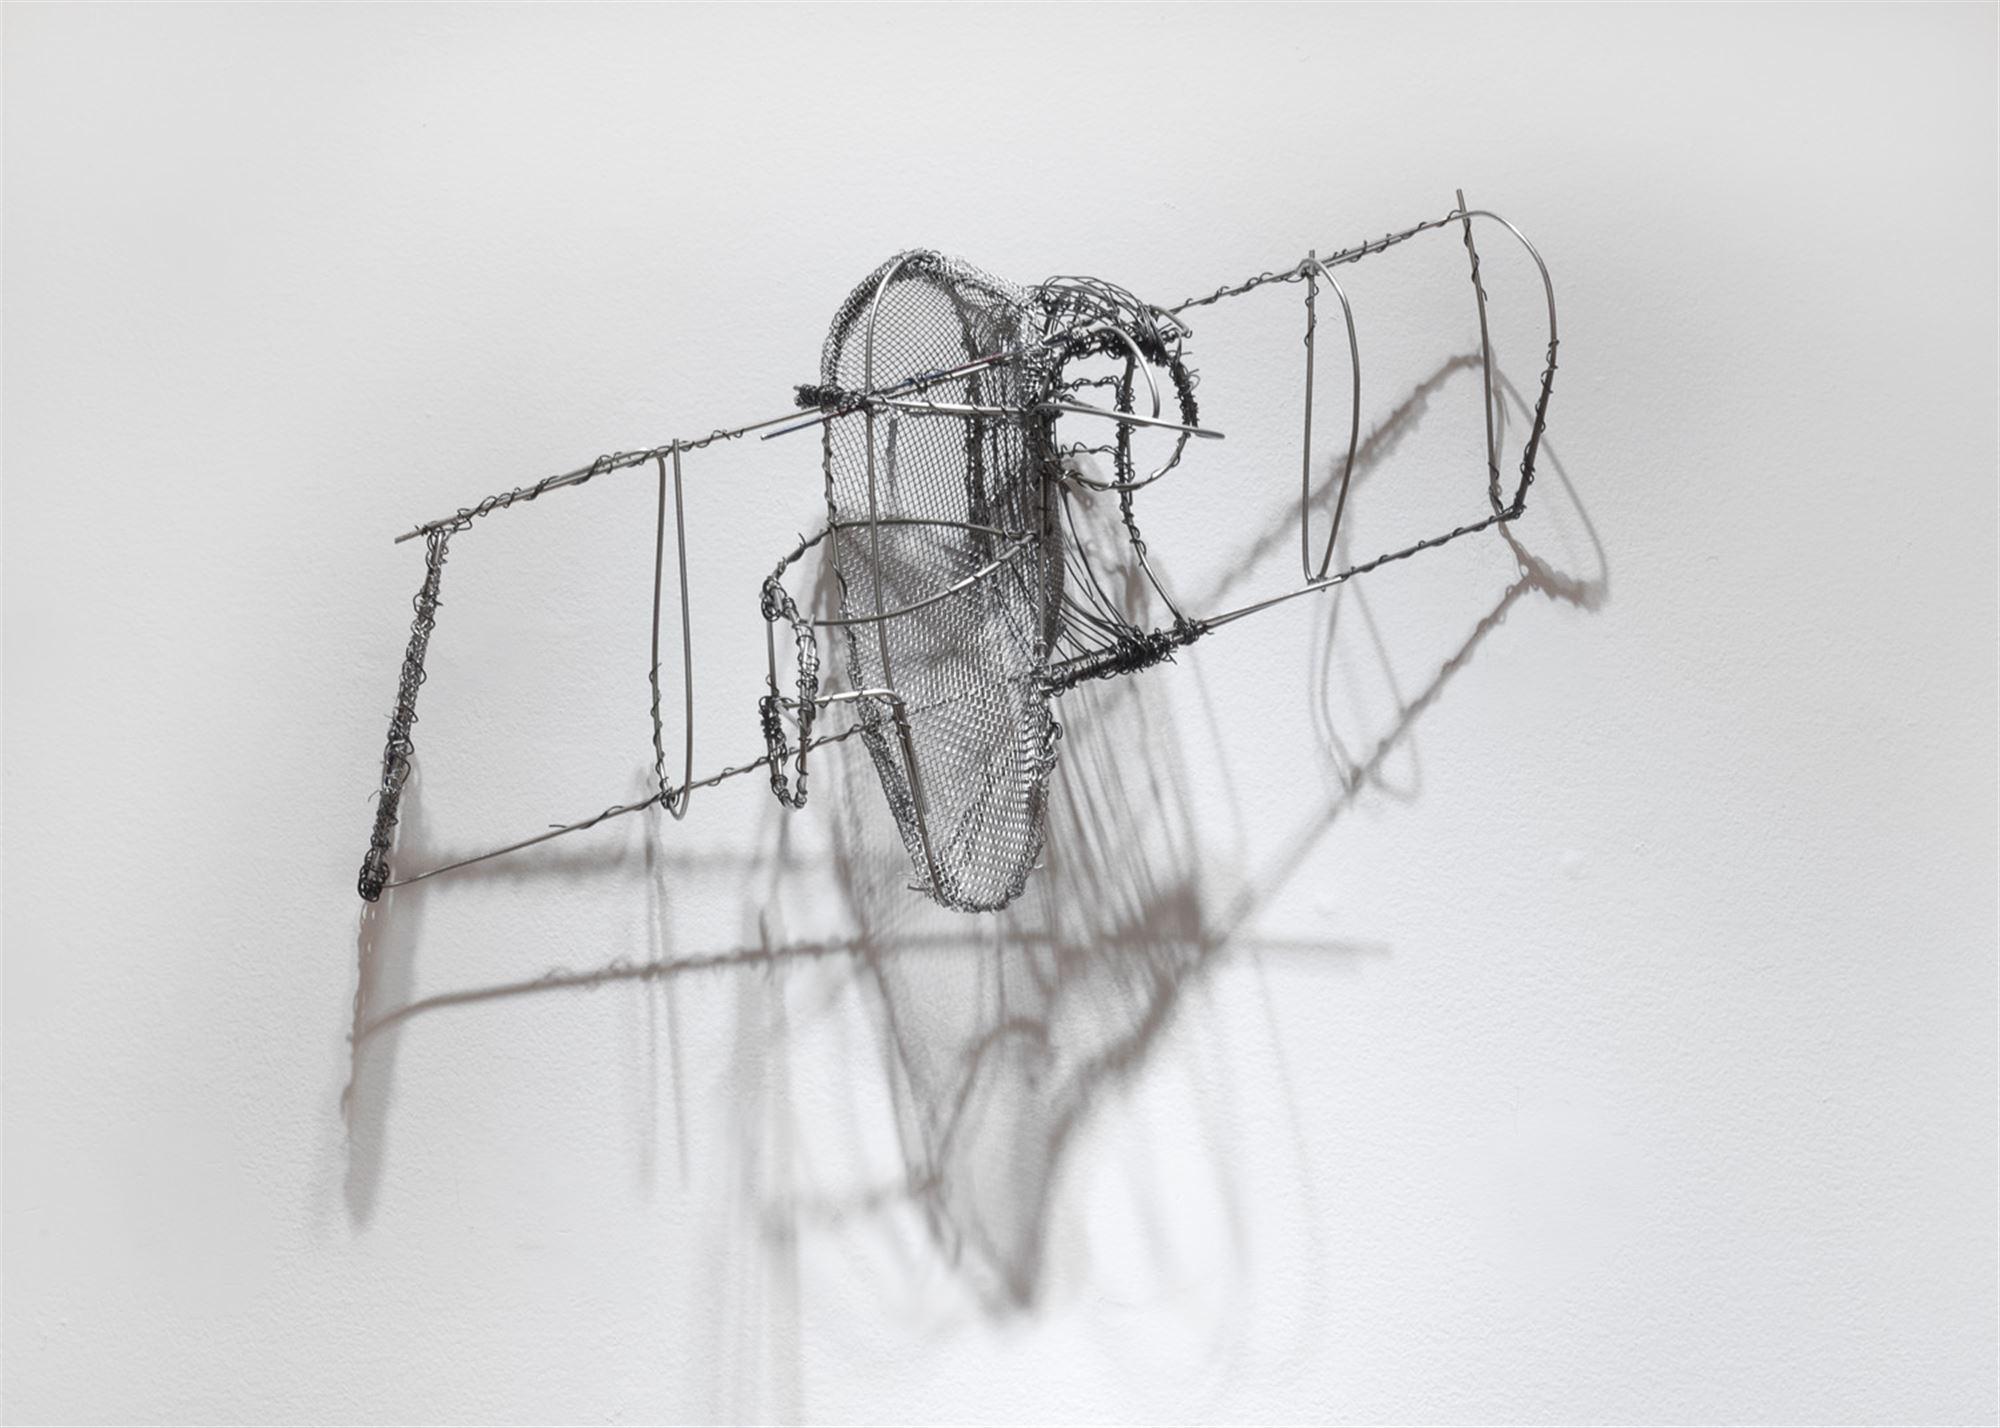 
		                					Victoria Bell		                																	
																											<i>Aerodyne,</i>  
																																								2016, 
																																								steel rod, stainless steel rod, wire mesh, binding wire, 
																																								11 x 27 x 15 inches 
																								
		                				